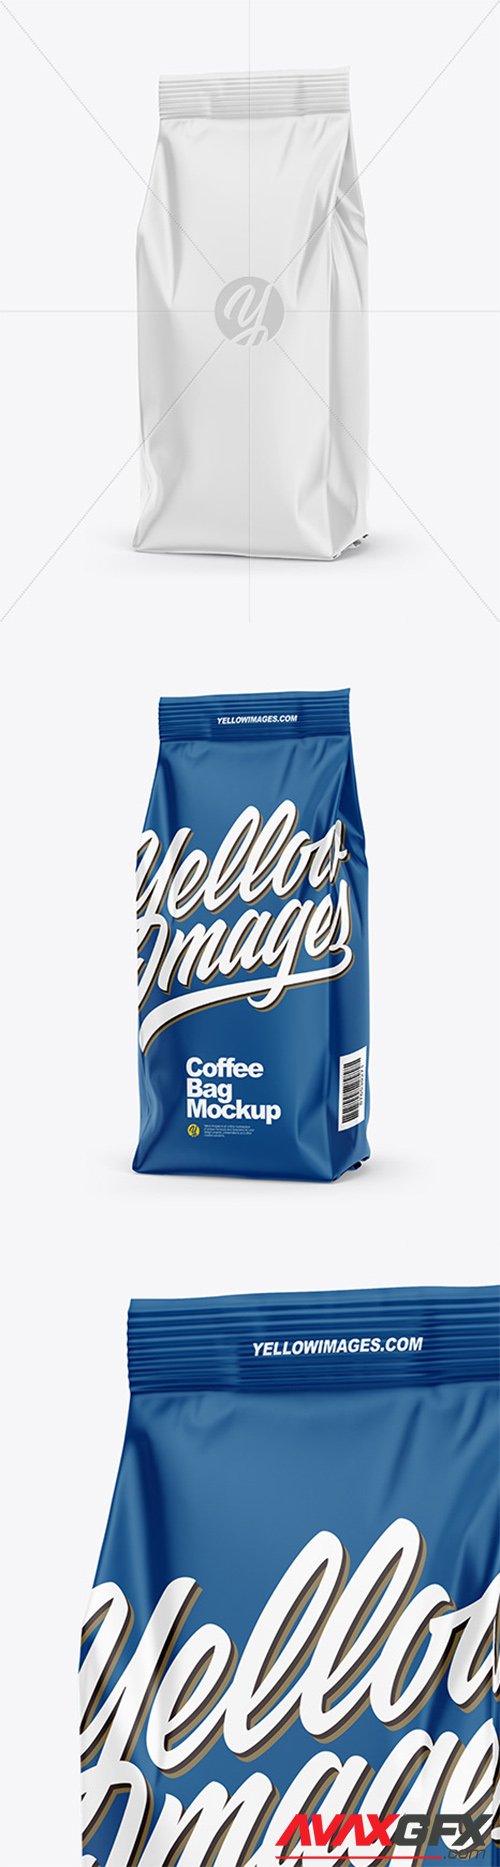 Download Matte Coffee Bag Mockup - Half Side View 66545 » AVAXGFX - All Downloads that You Need in One ...